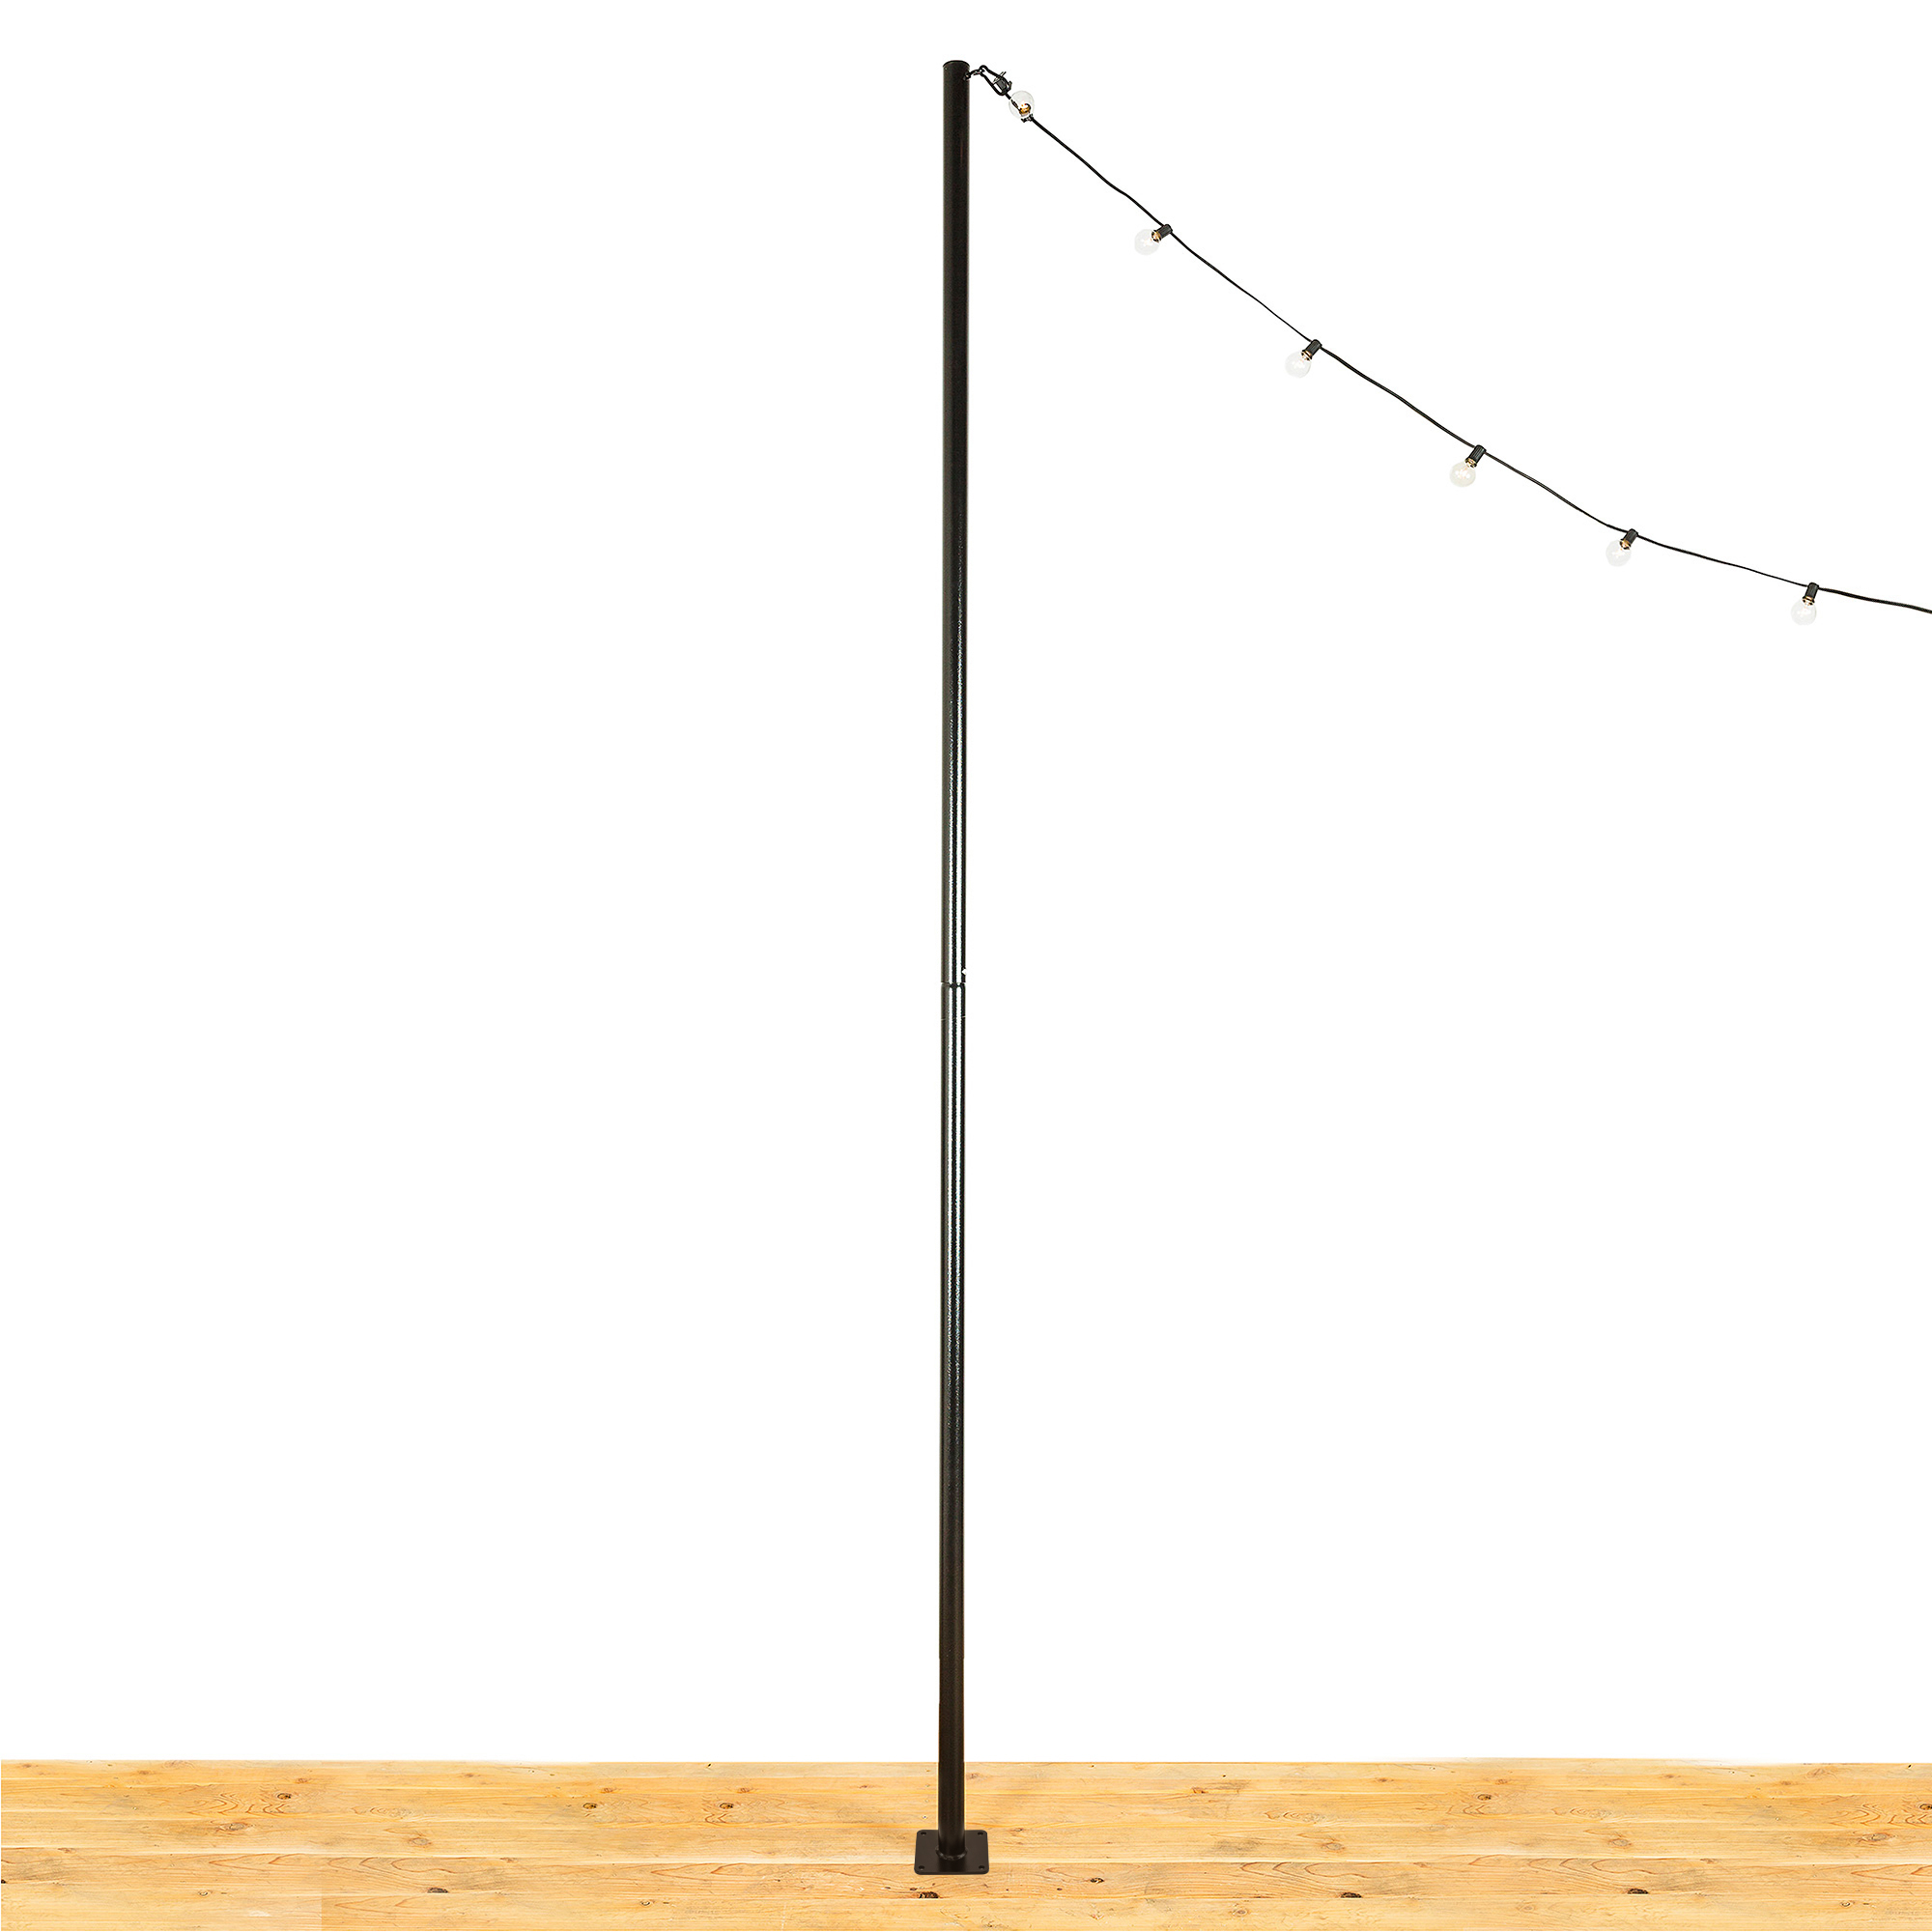 IYN, 9.5ft. String Light Pole Stand With Mounting Plate, Color Black, Included (qty.) 1 Model 32378